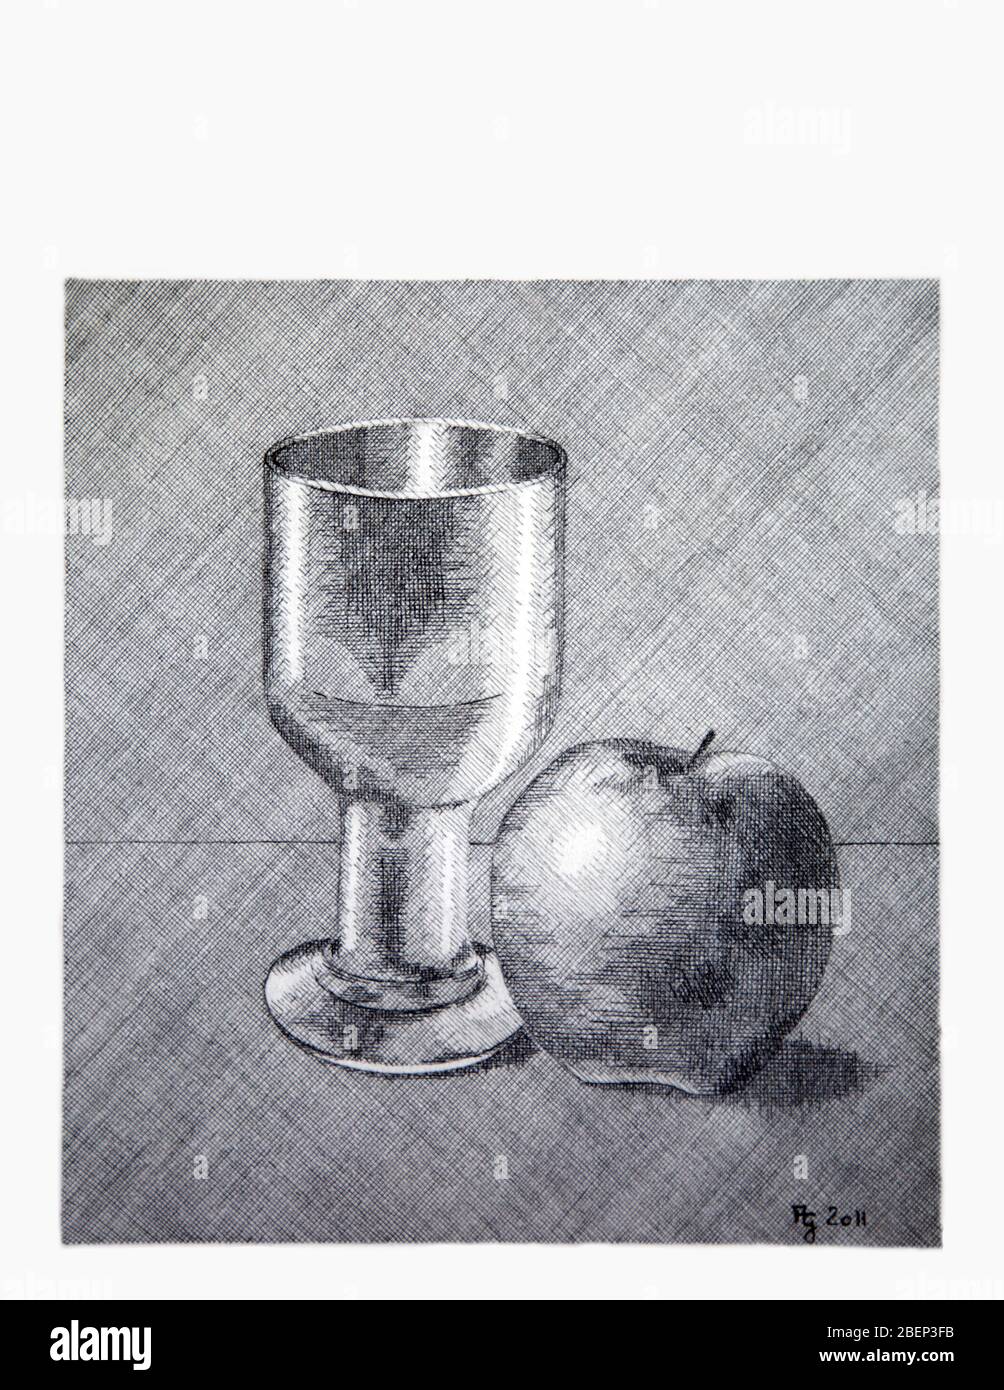 Pencil drawing glass with water | Mais um trabalho finalizad… | Flickr